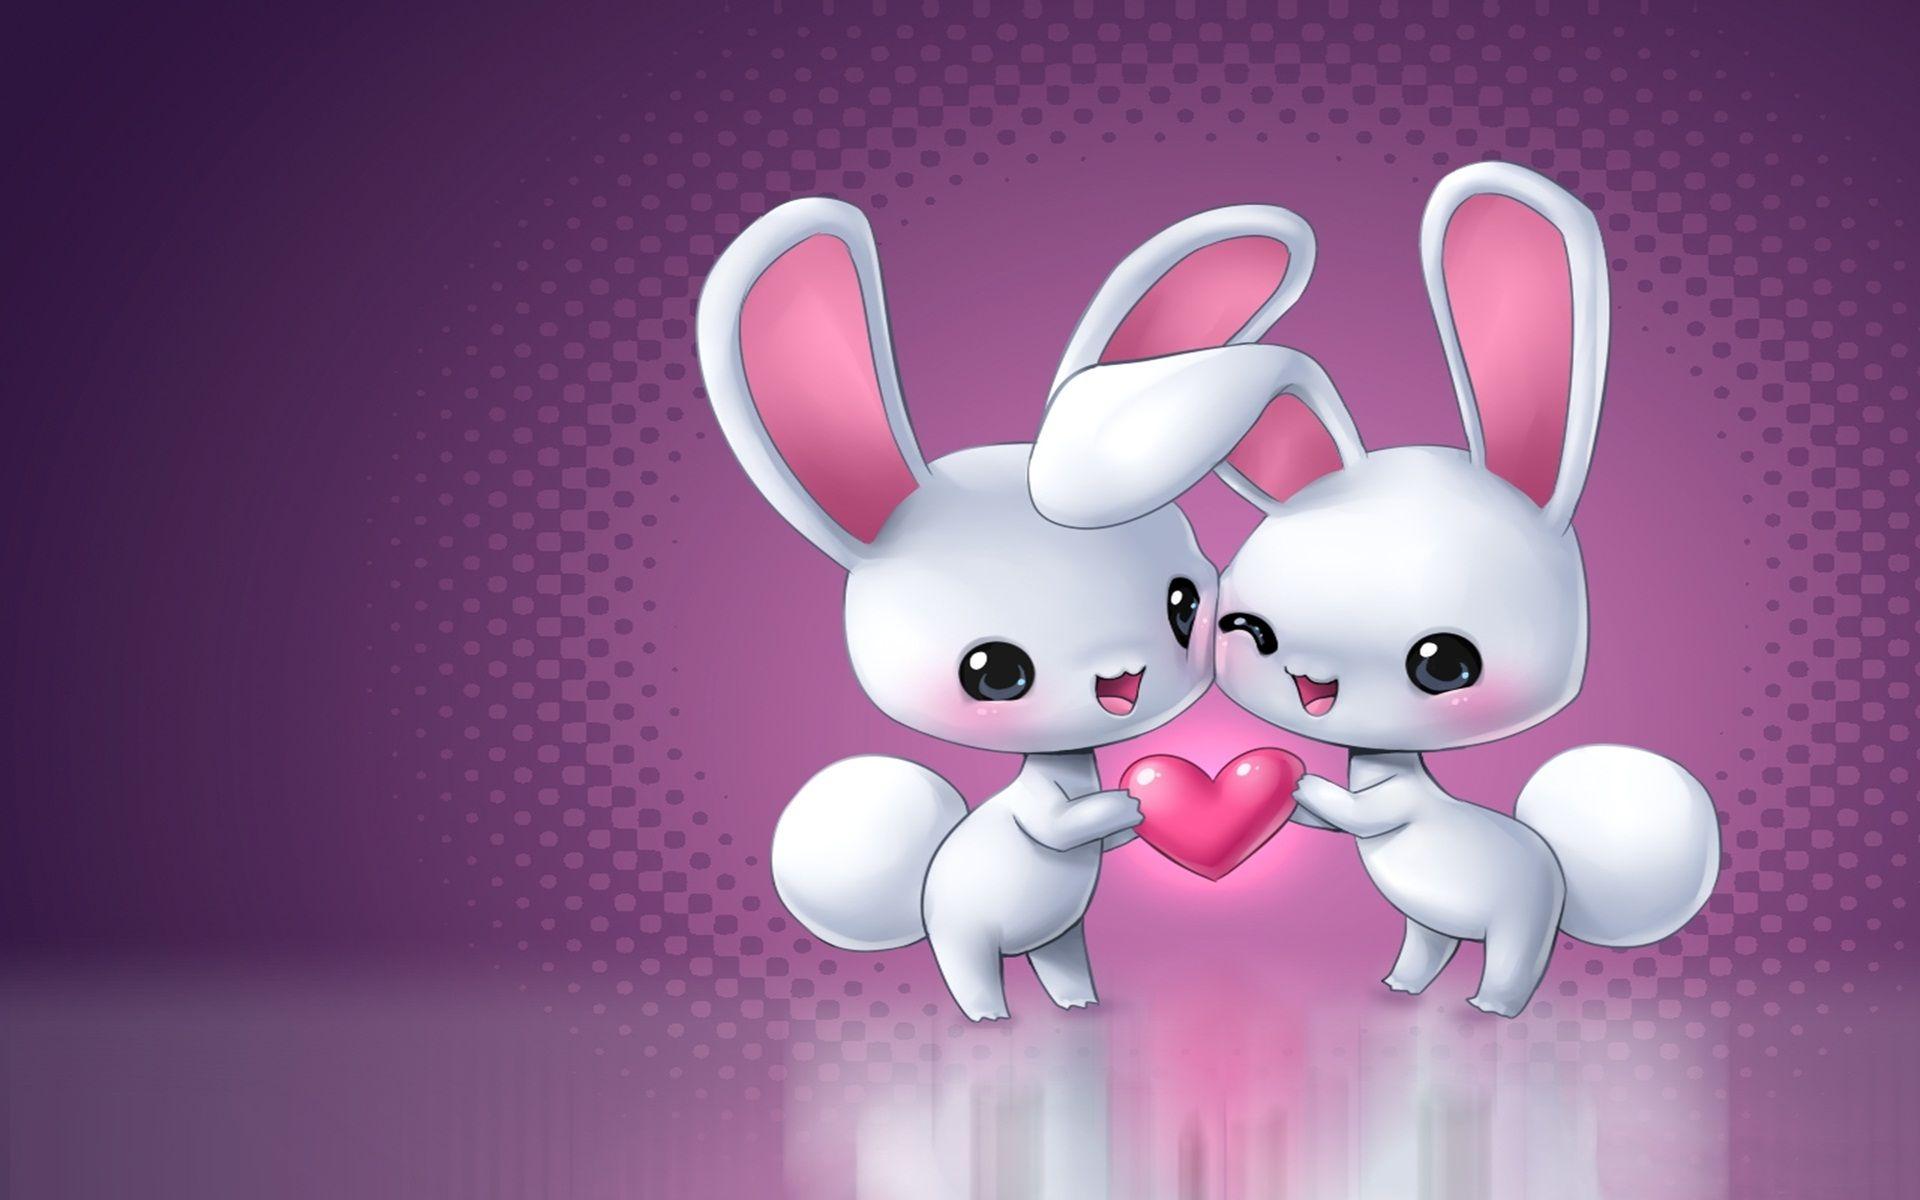 Cute Rabbit Cartoon Mobile Wallpaper Background Wallpaper Image For Free  Download - Pngtree